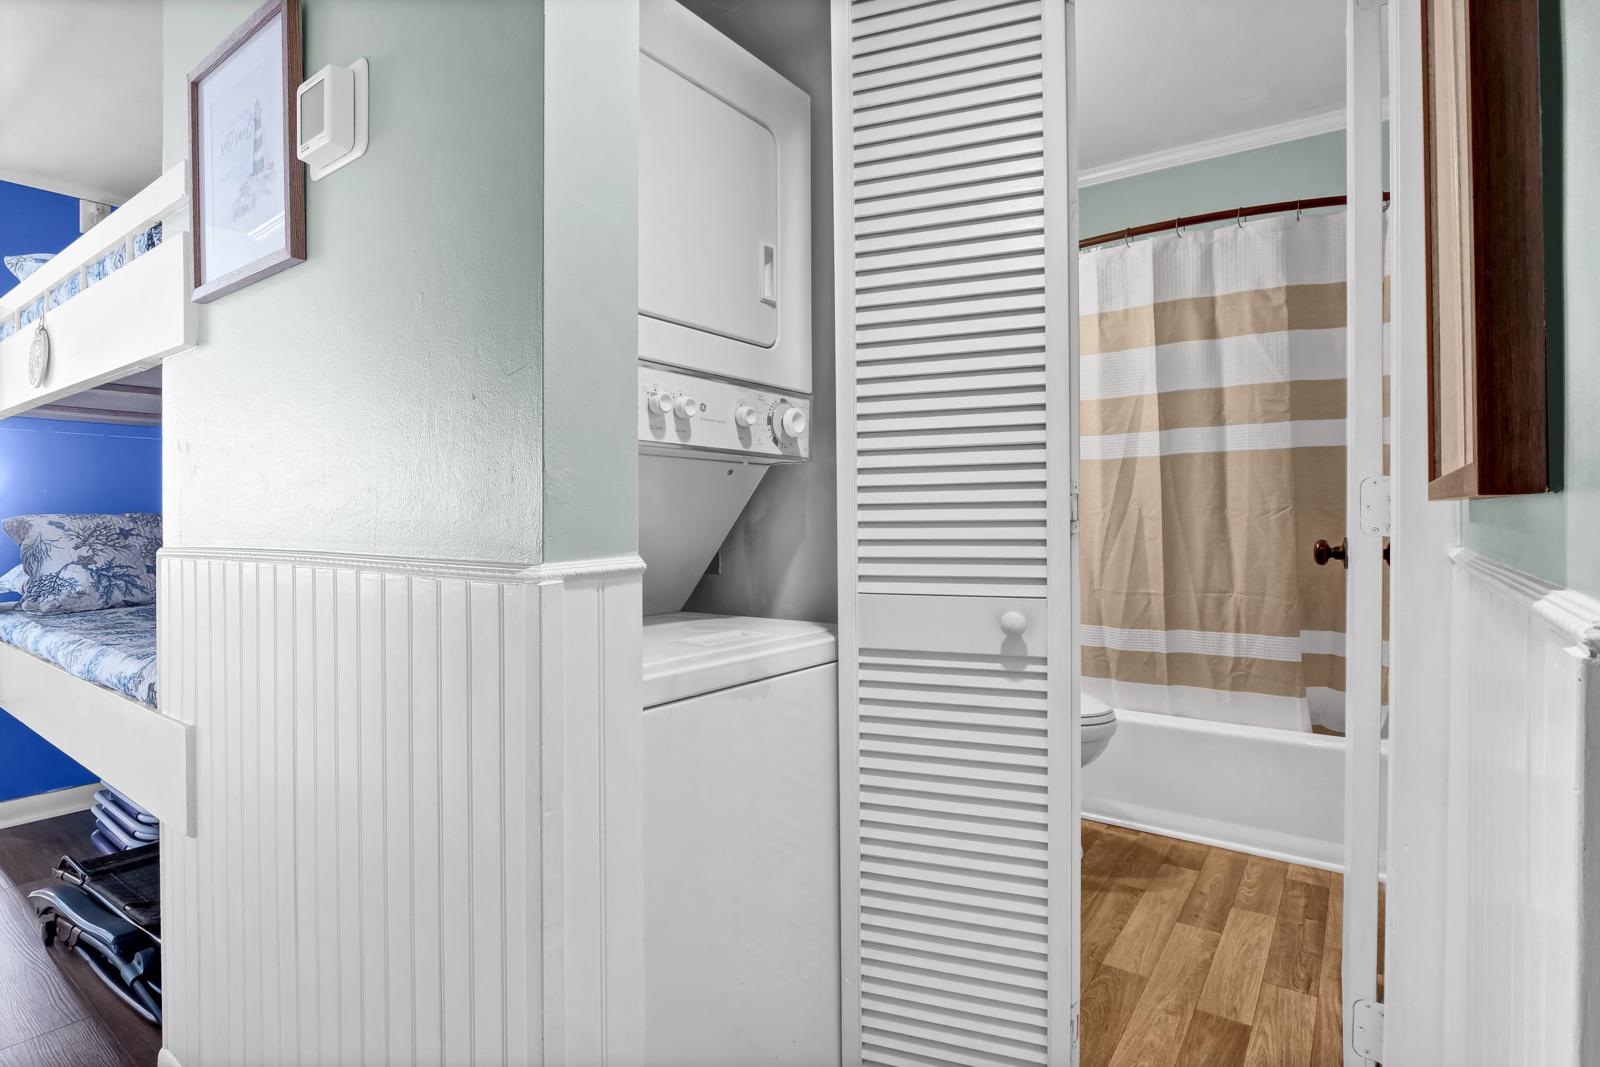 Convenience at Your Fingertips: Washer and Dryer Included for Your Comfort.